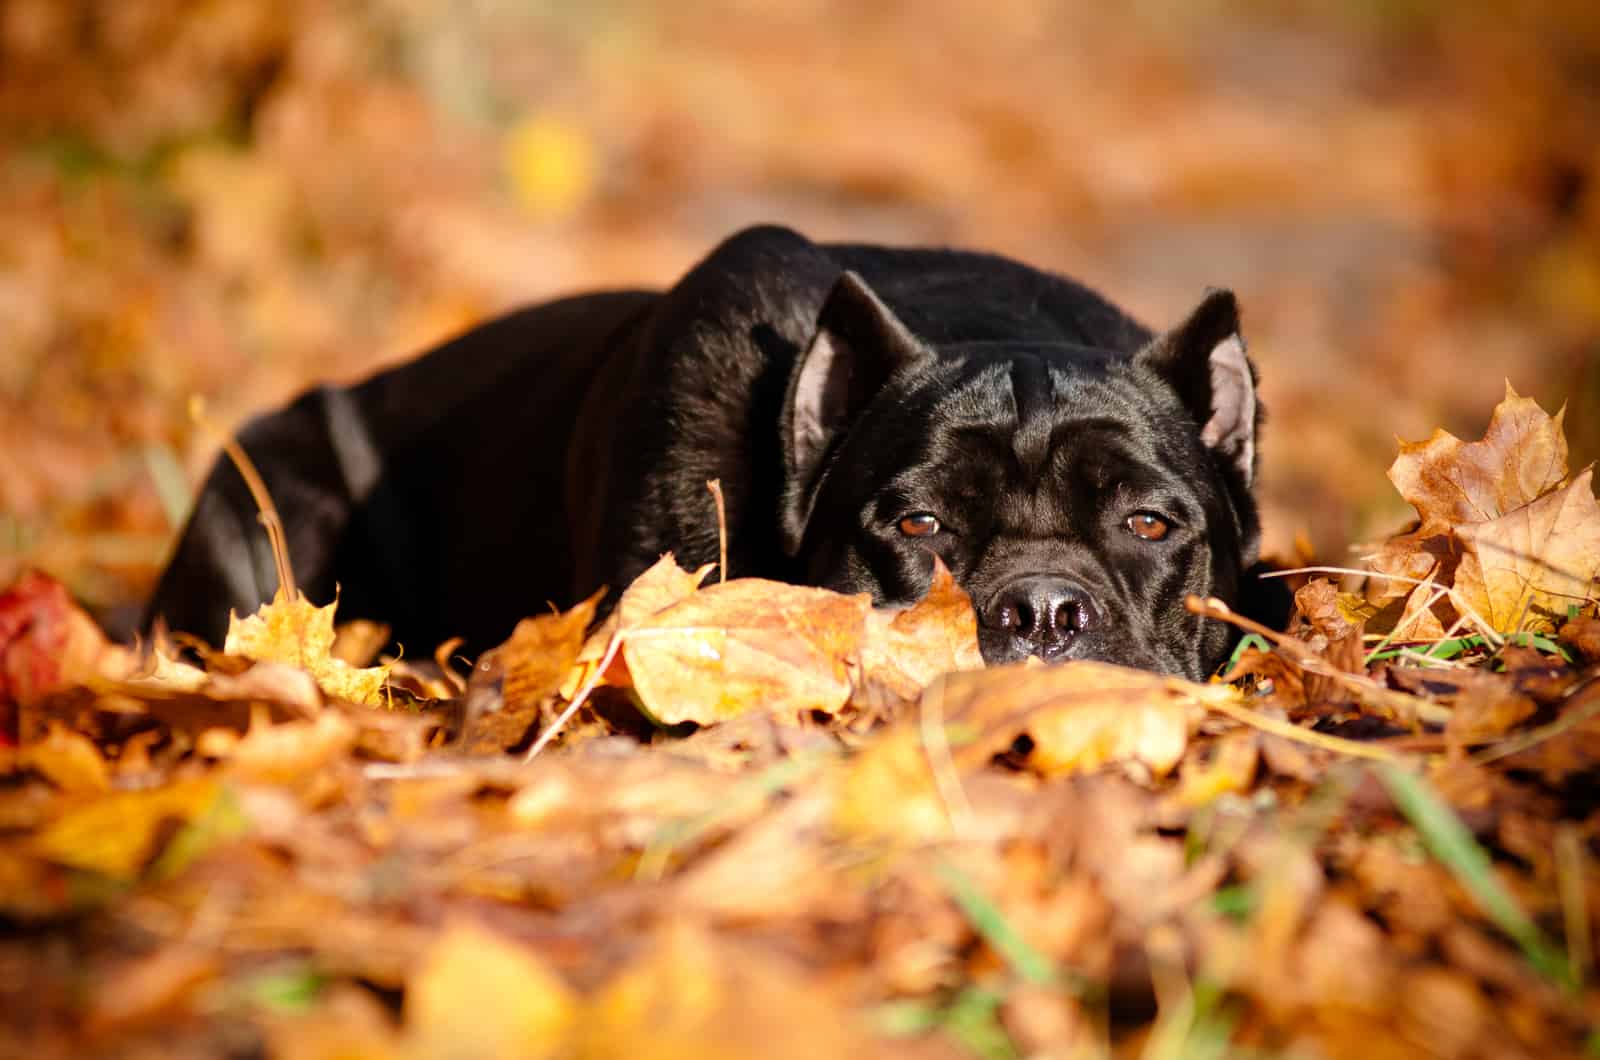 cane corso puppy resting in autumn leaves